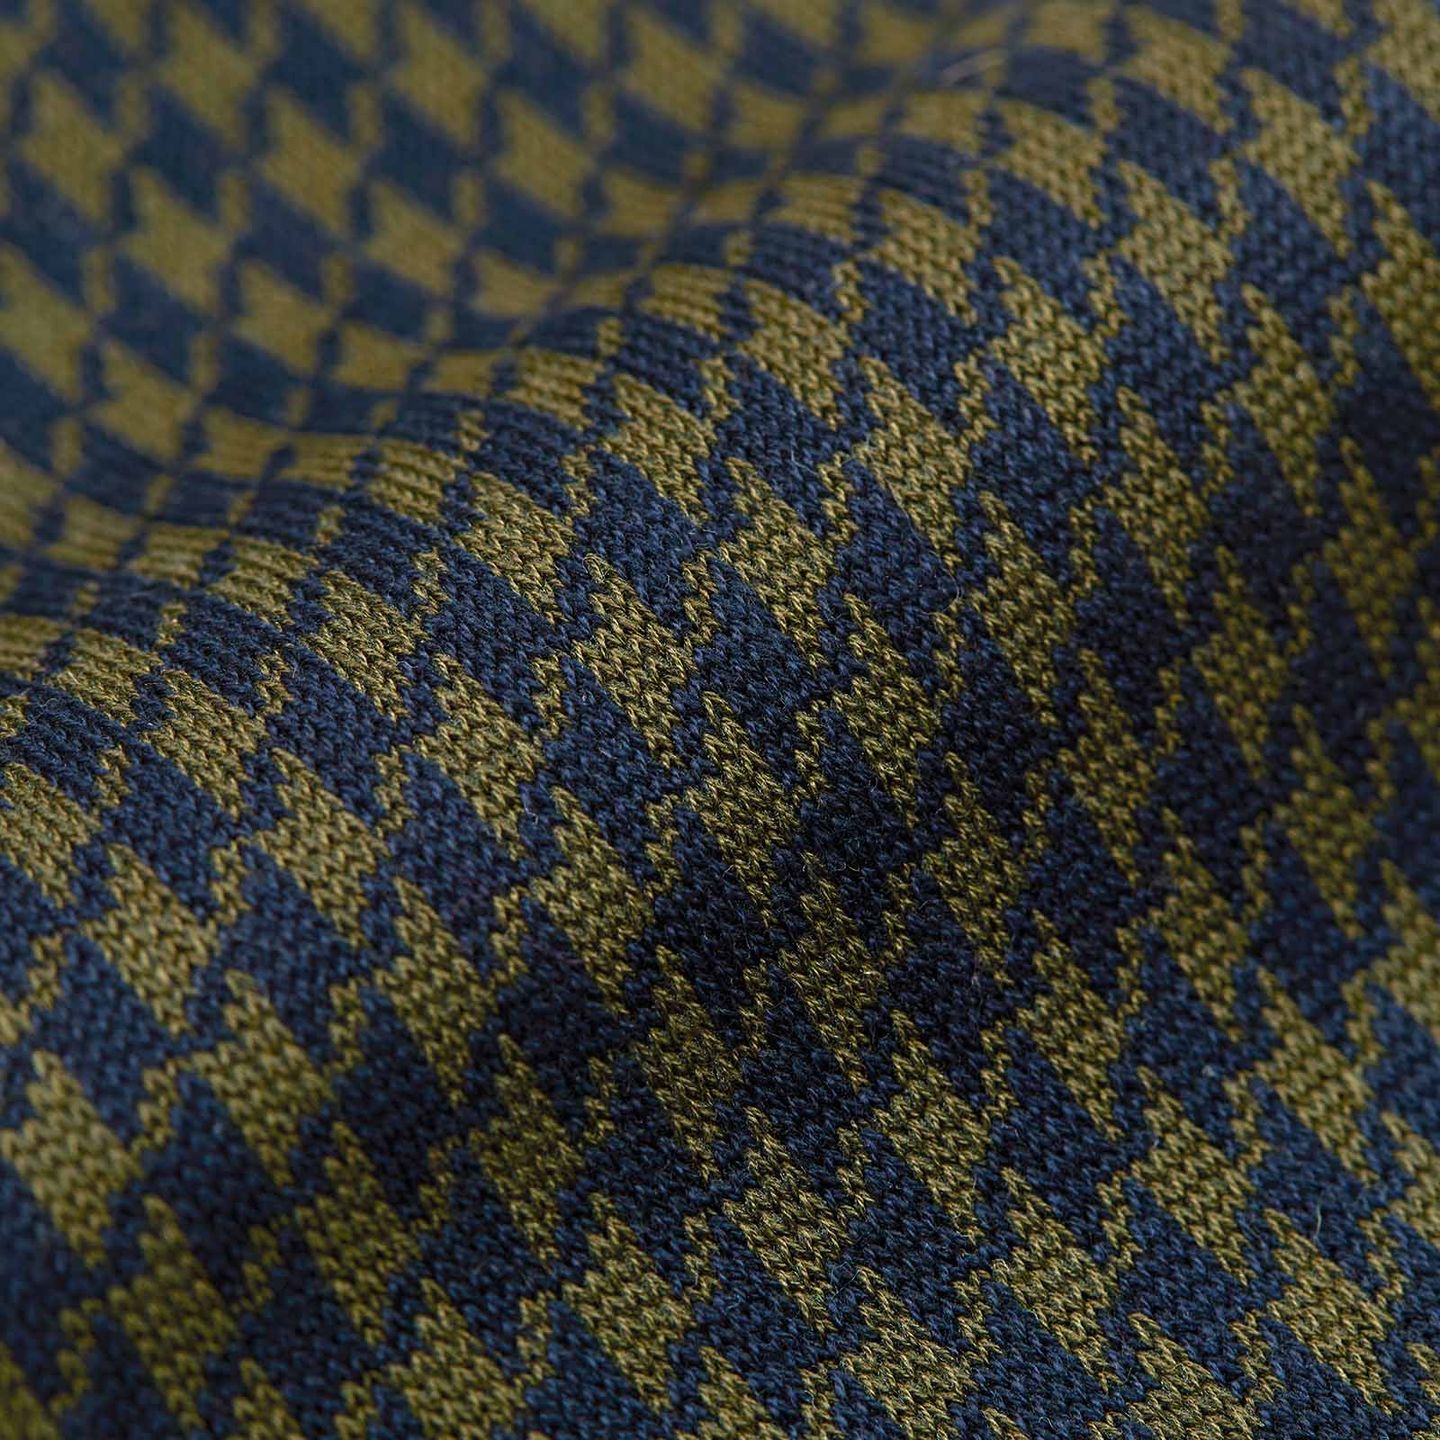 Close up of olive and blue Houndtooth patterned socks